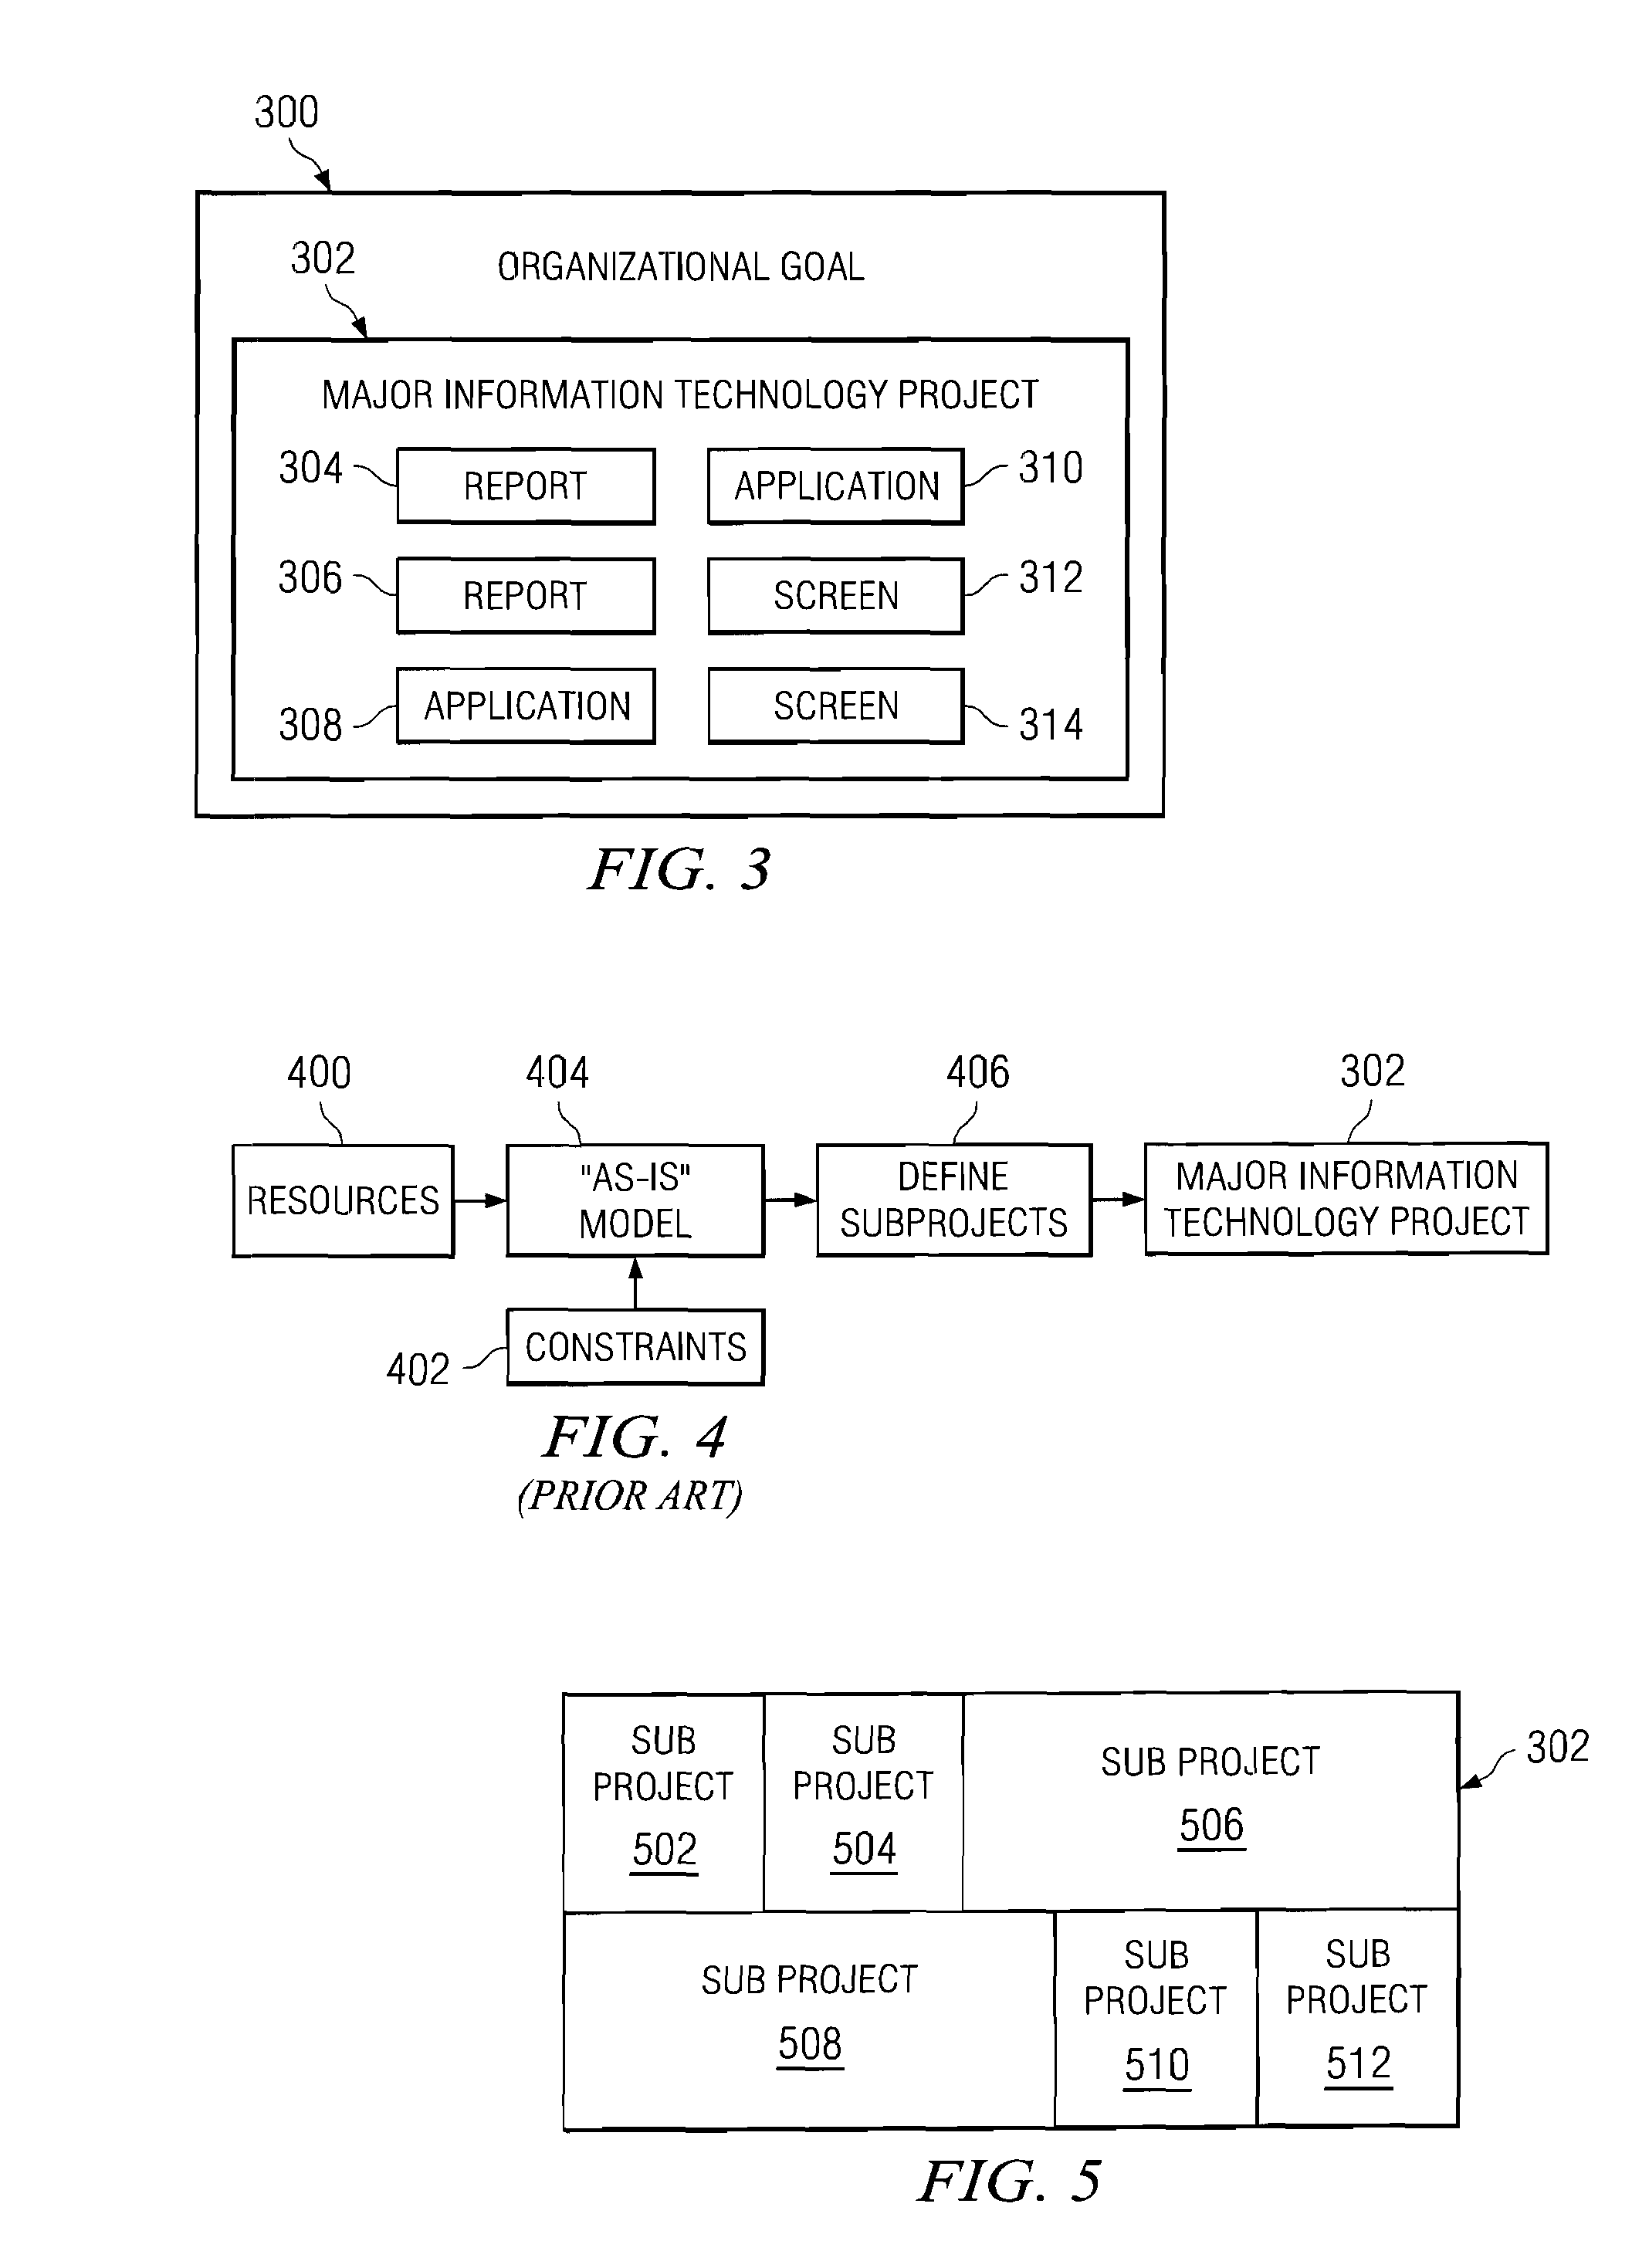 System and method for optimizing federated and ETL'd databases with considerations of specialized data structures within an environment having multidimensional constraints